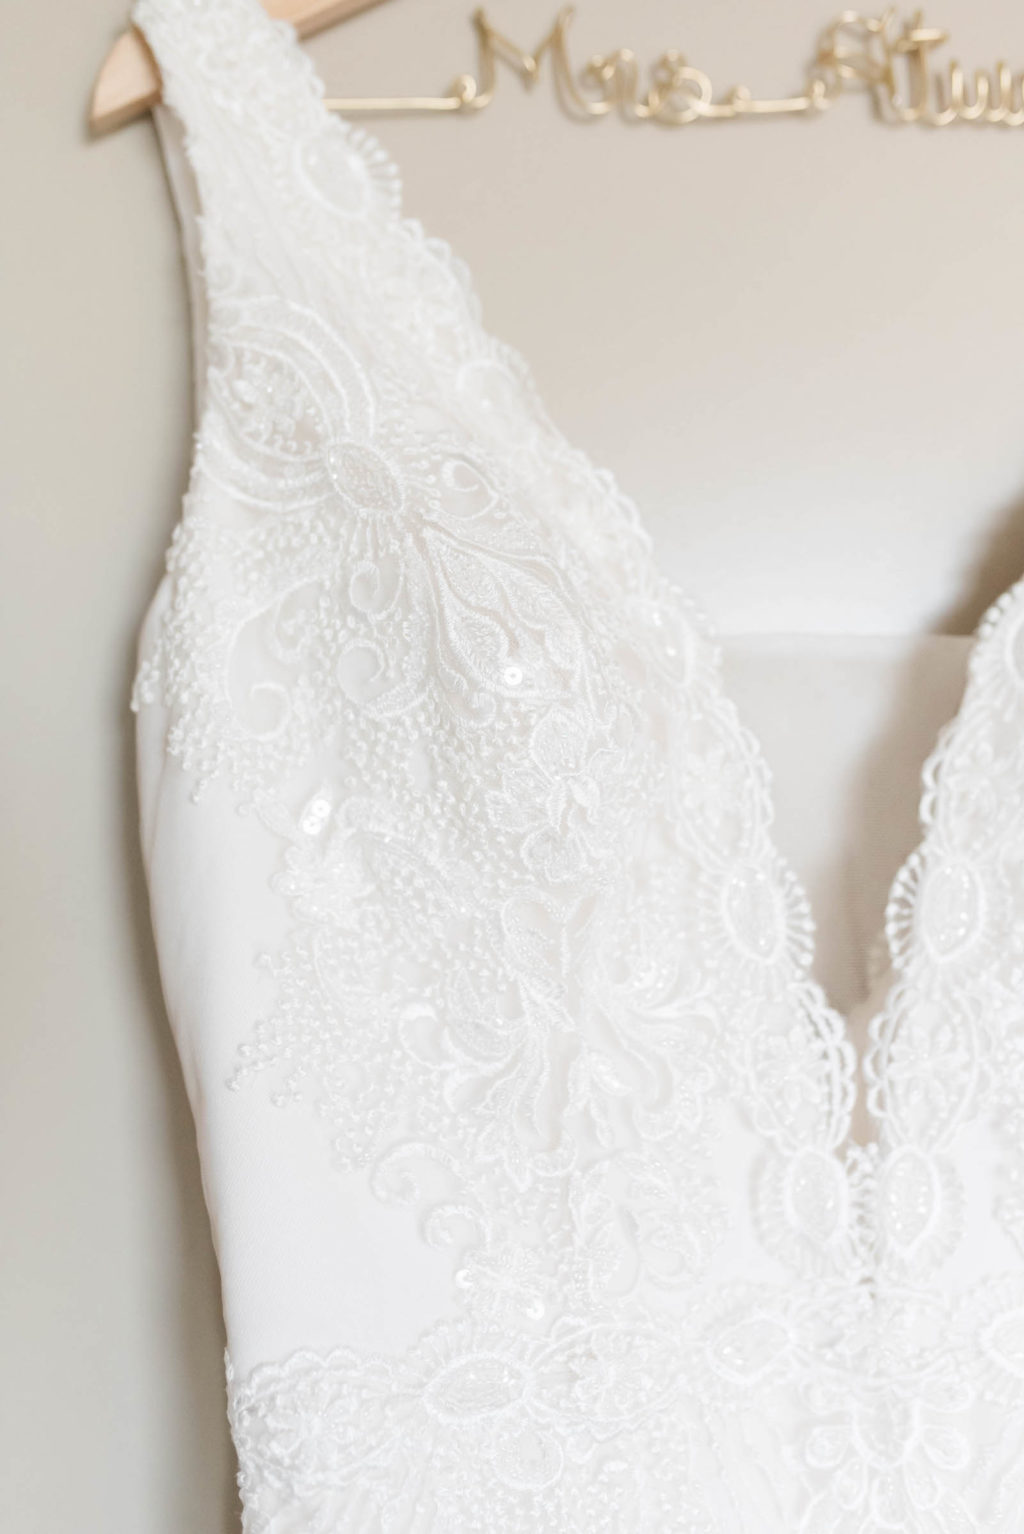 Scalloped Neckline Wedding Gown with Illusion Detail | Ivory & Lace Maggie Sottero Wedding Dress